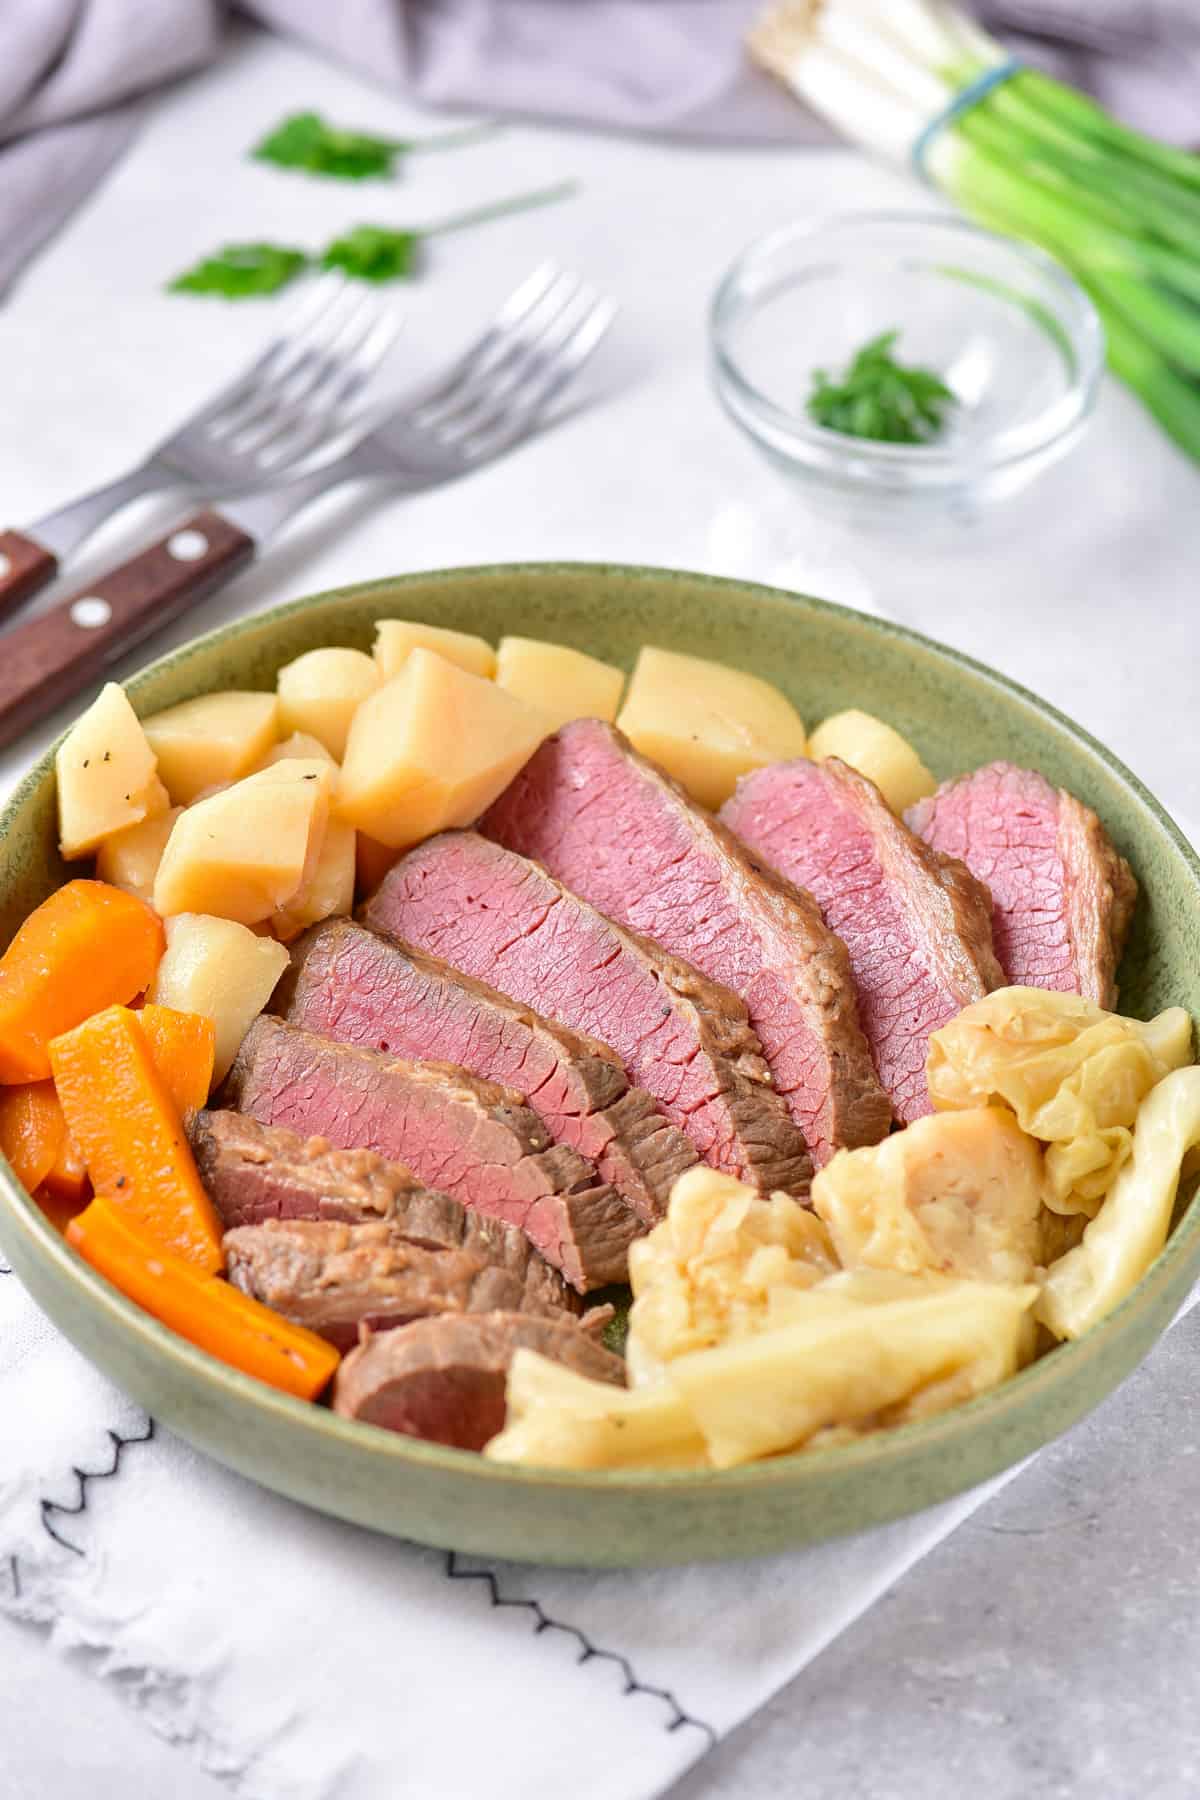 Table with a plate of corned beef with cabbage, potatoes and carrots.